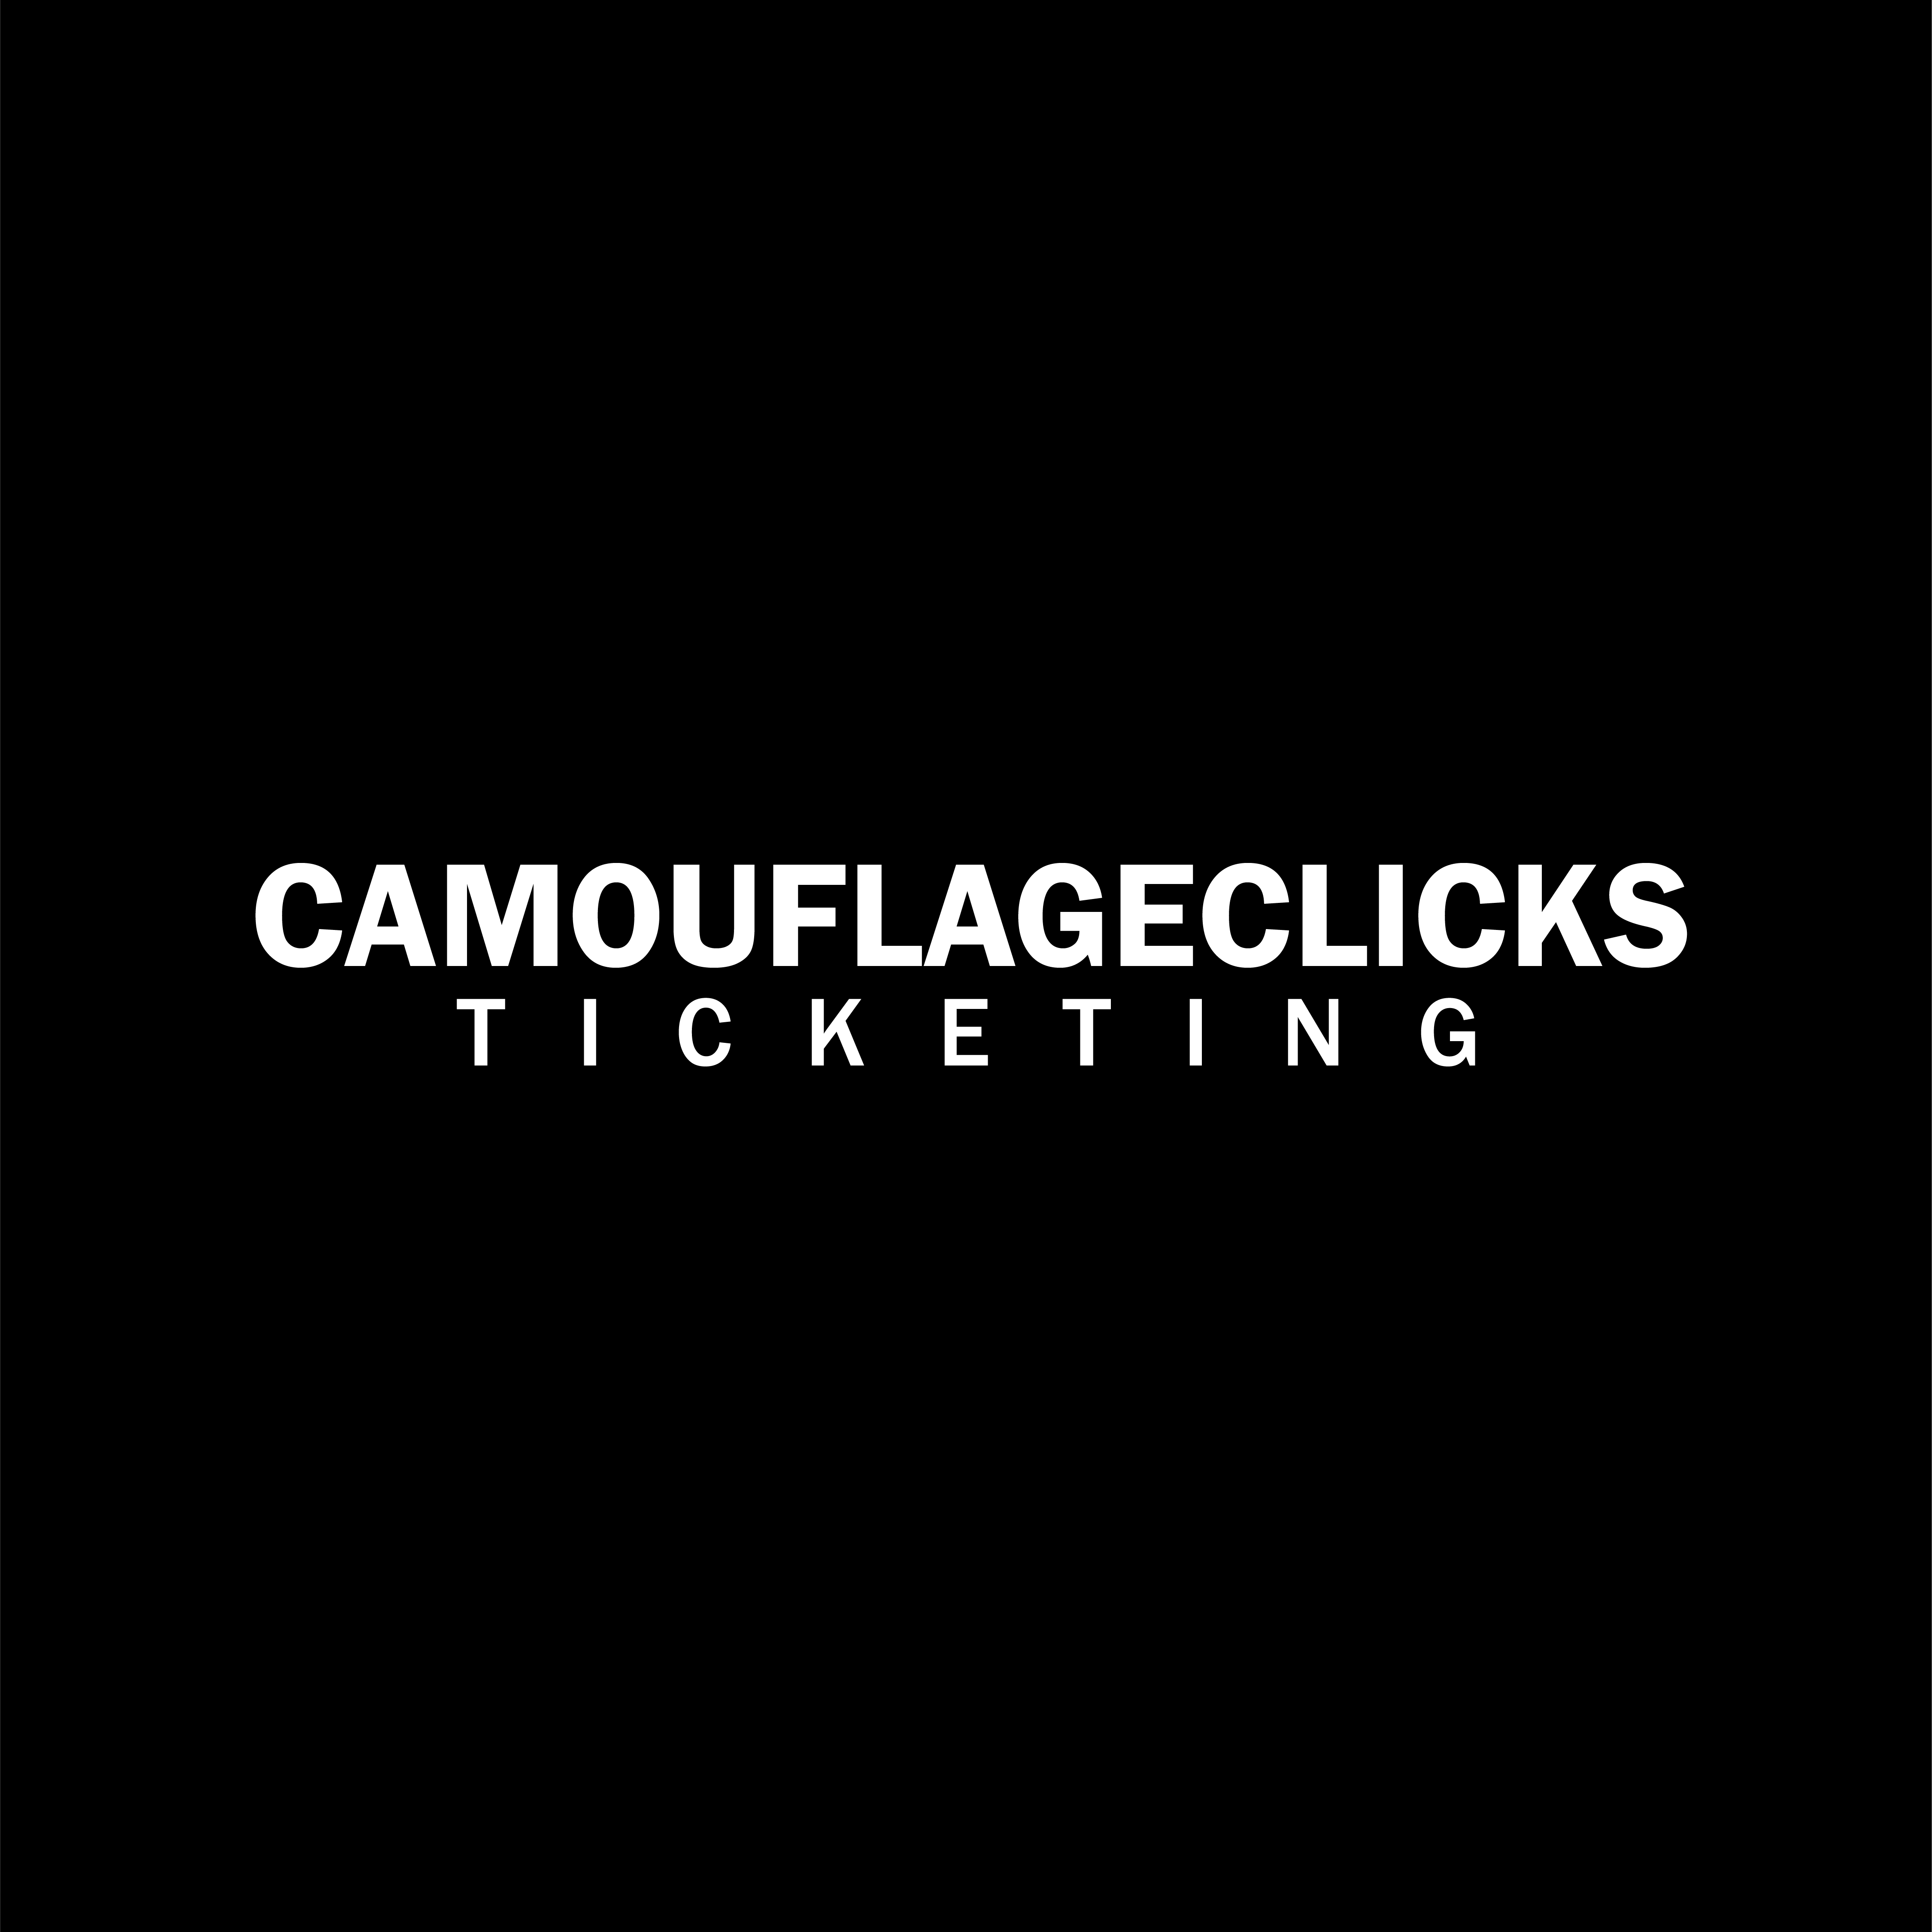 Camouflageclicks Ticketing|Catering Services|Event Services